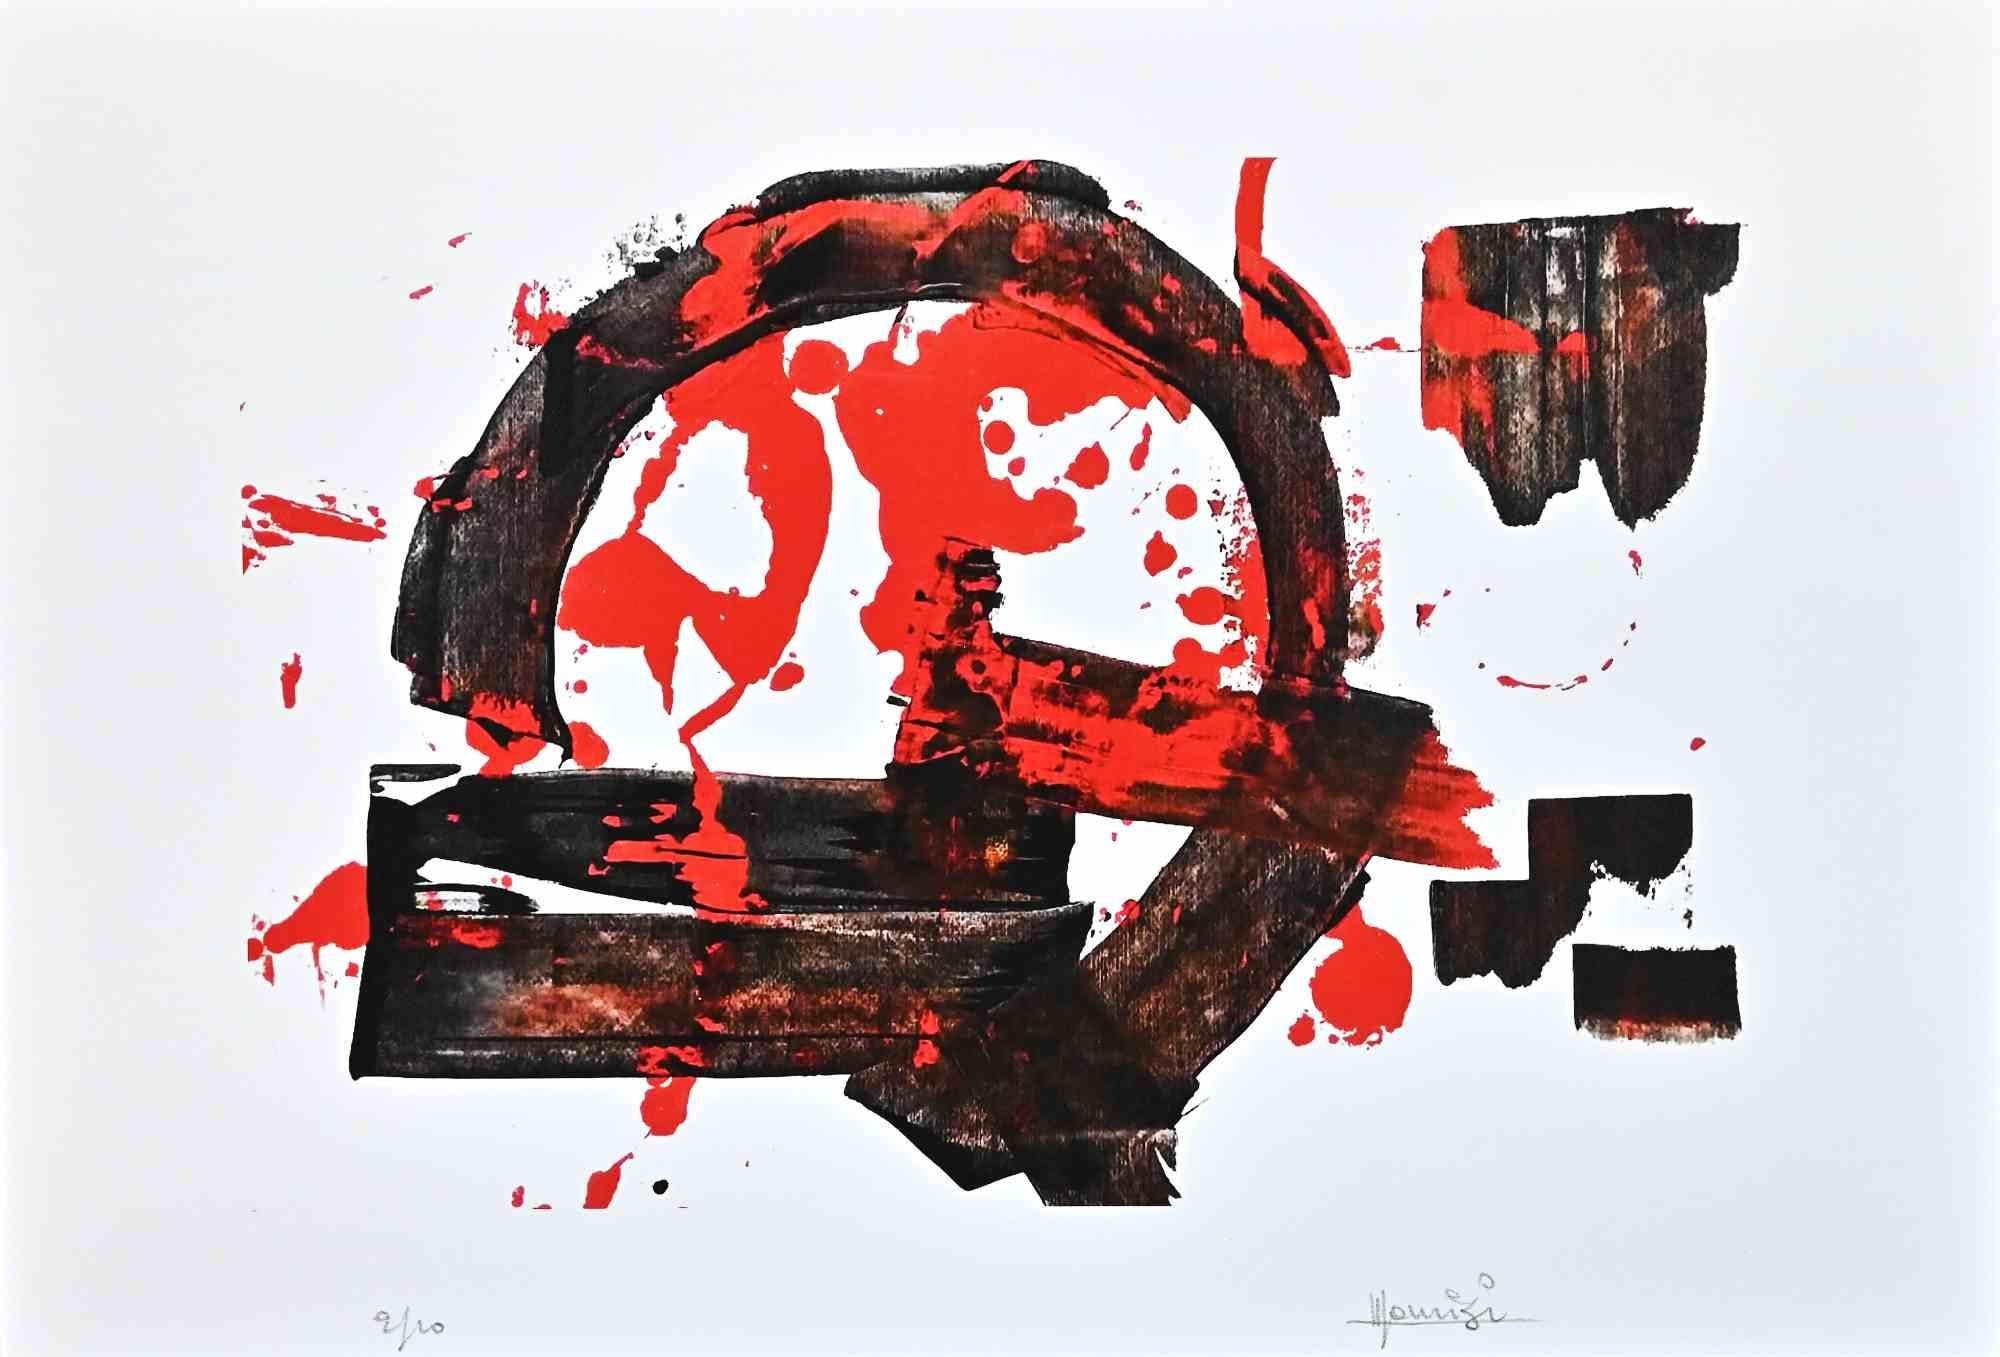 Composition is an original screen print on white paper realized by Italian artist Tonino Maurizi.

Hand-signed on the lower right.

Numbered on the lower left, edition of 2/10 prints.

Very good conditions.